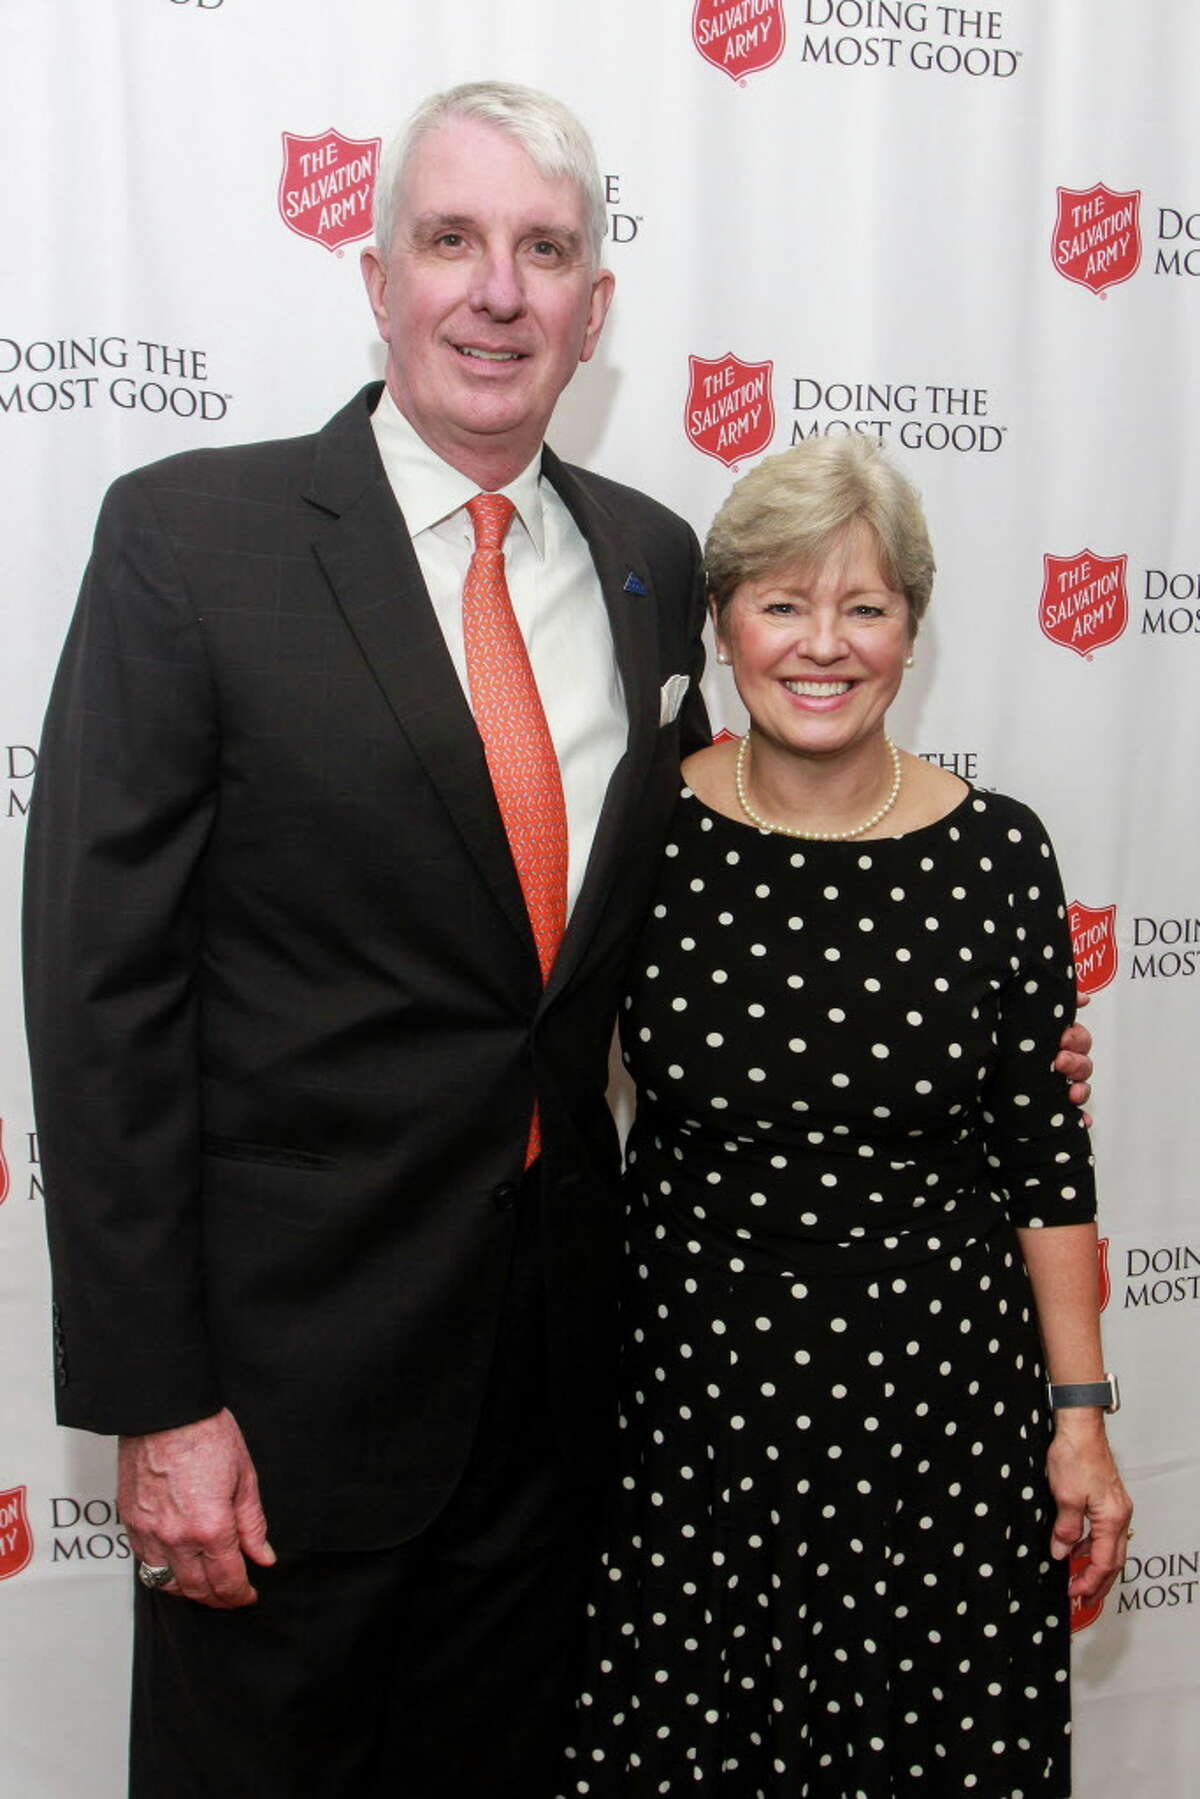 Chairs Jeff and Beth Early at The Salvation Army "Doing the Most Good" Luncheon at River Oaks Country Club.